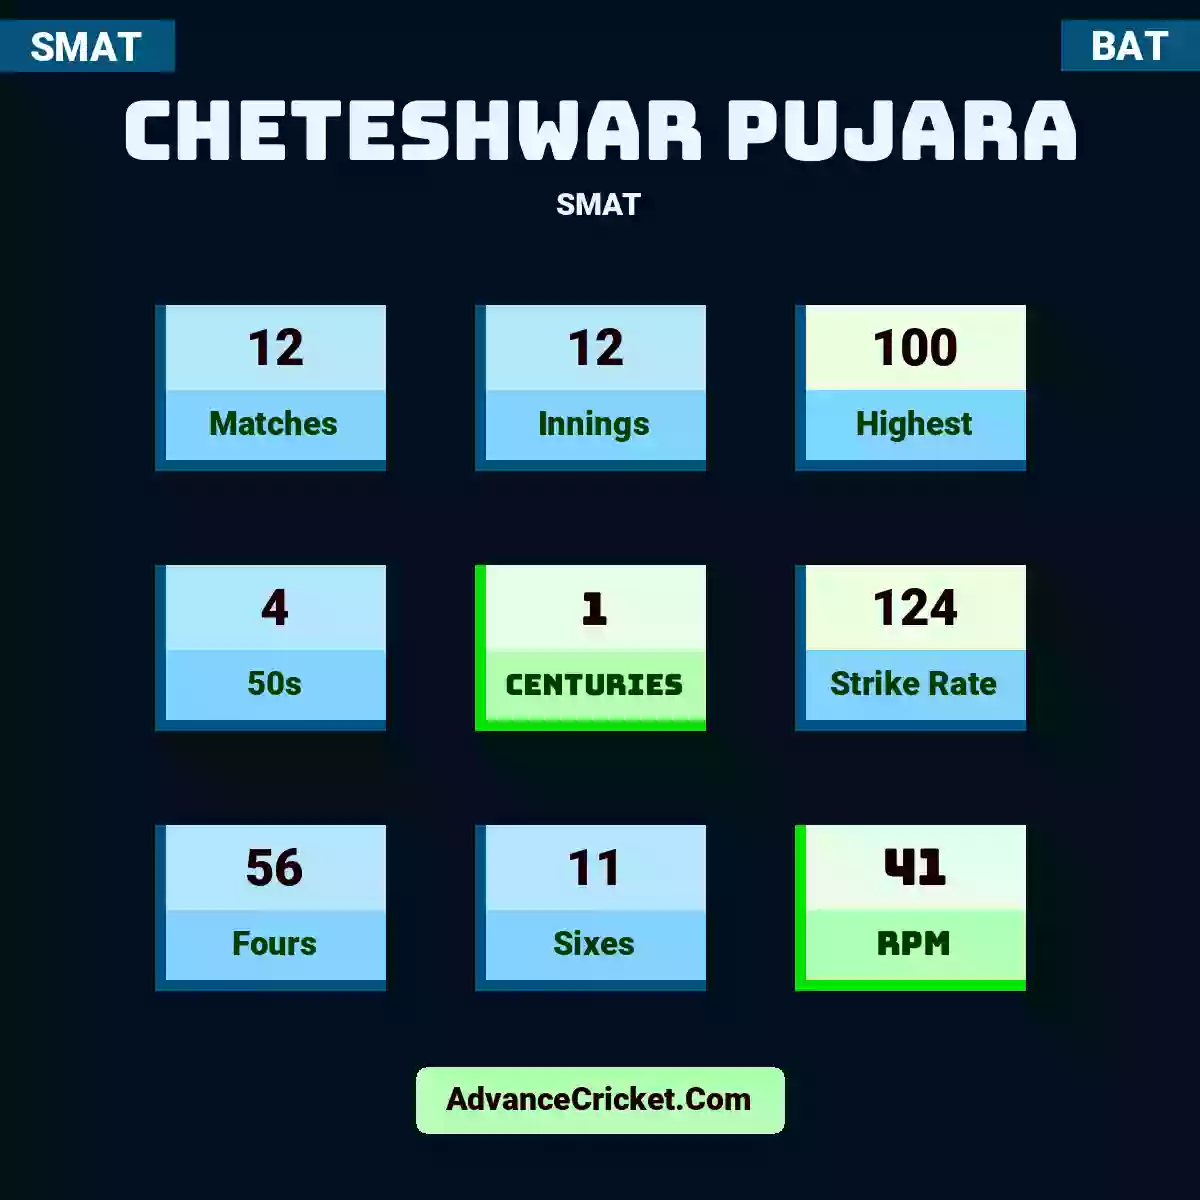 Cheteshwar Pujara SMAT , Cheteshwar Pujara played 12 matches, scored 100 runs as highest, 4 half-centuries, and 1 centuries, with a strike rate of 124. C.Pujara hit 56 fours and 11 sixes, with an RPM of 41.